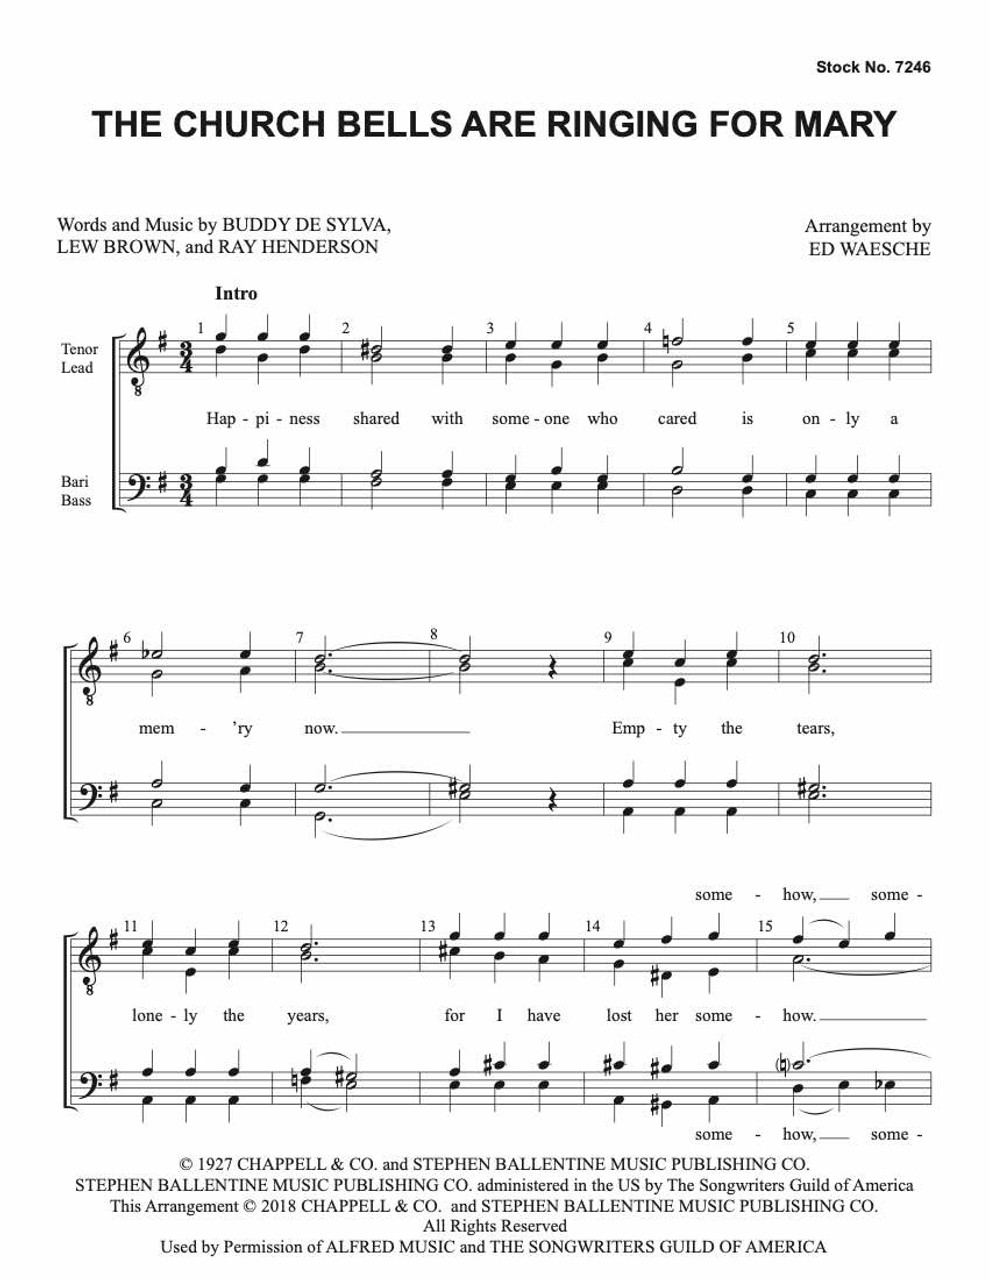 The Church Bells Are Ringing For Mary (TTBB) (arr. Waesche)  - Download